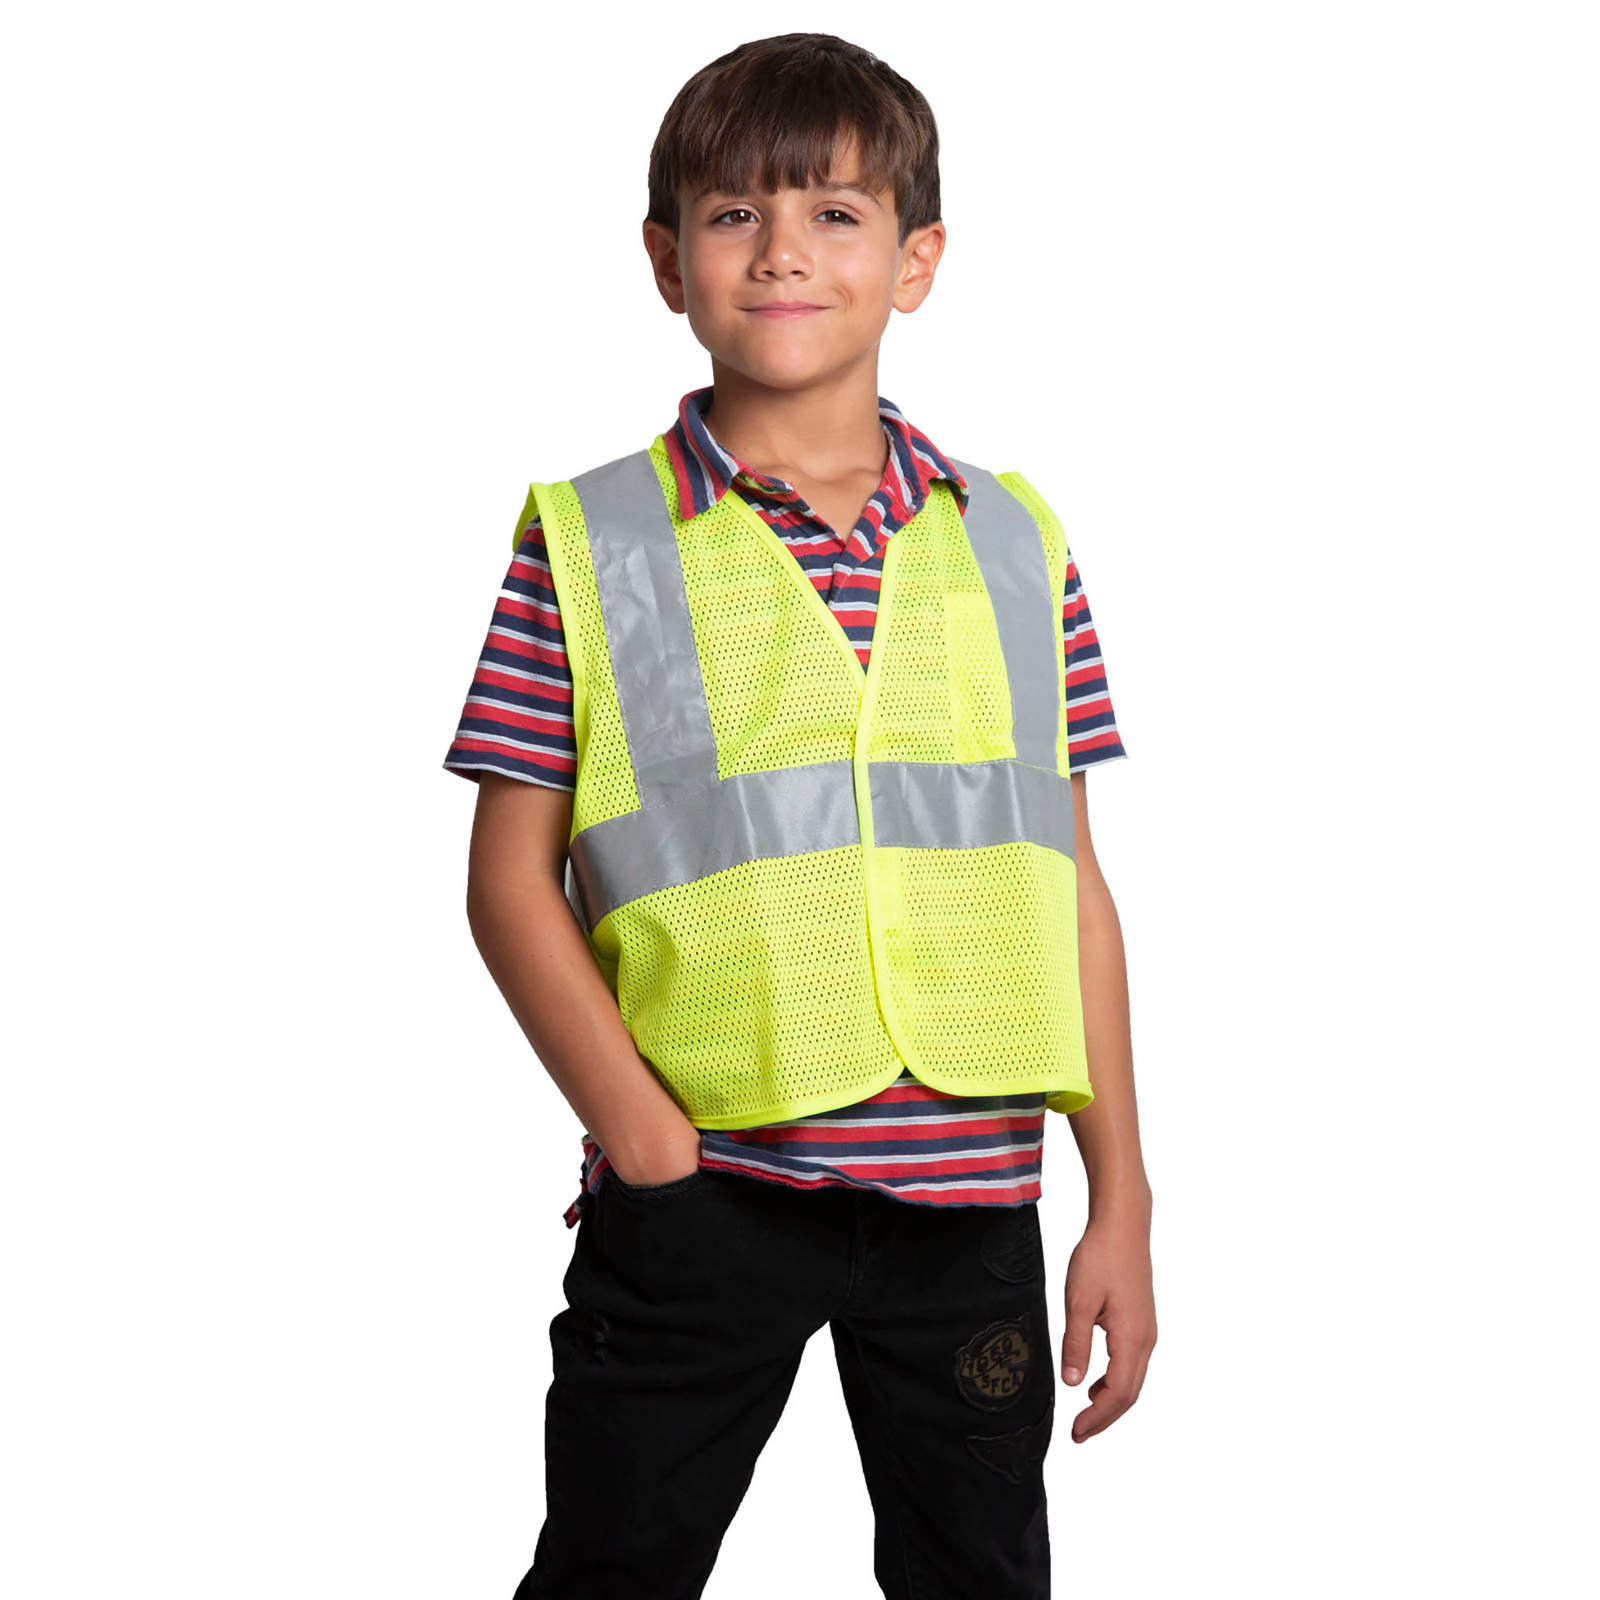 an 8 year old boy wearing a lime JORESTECH reflective safety vest for kids 